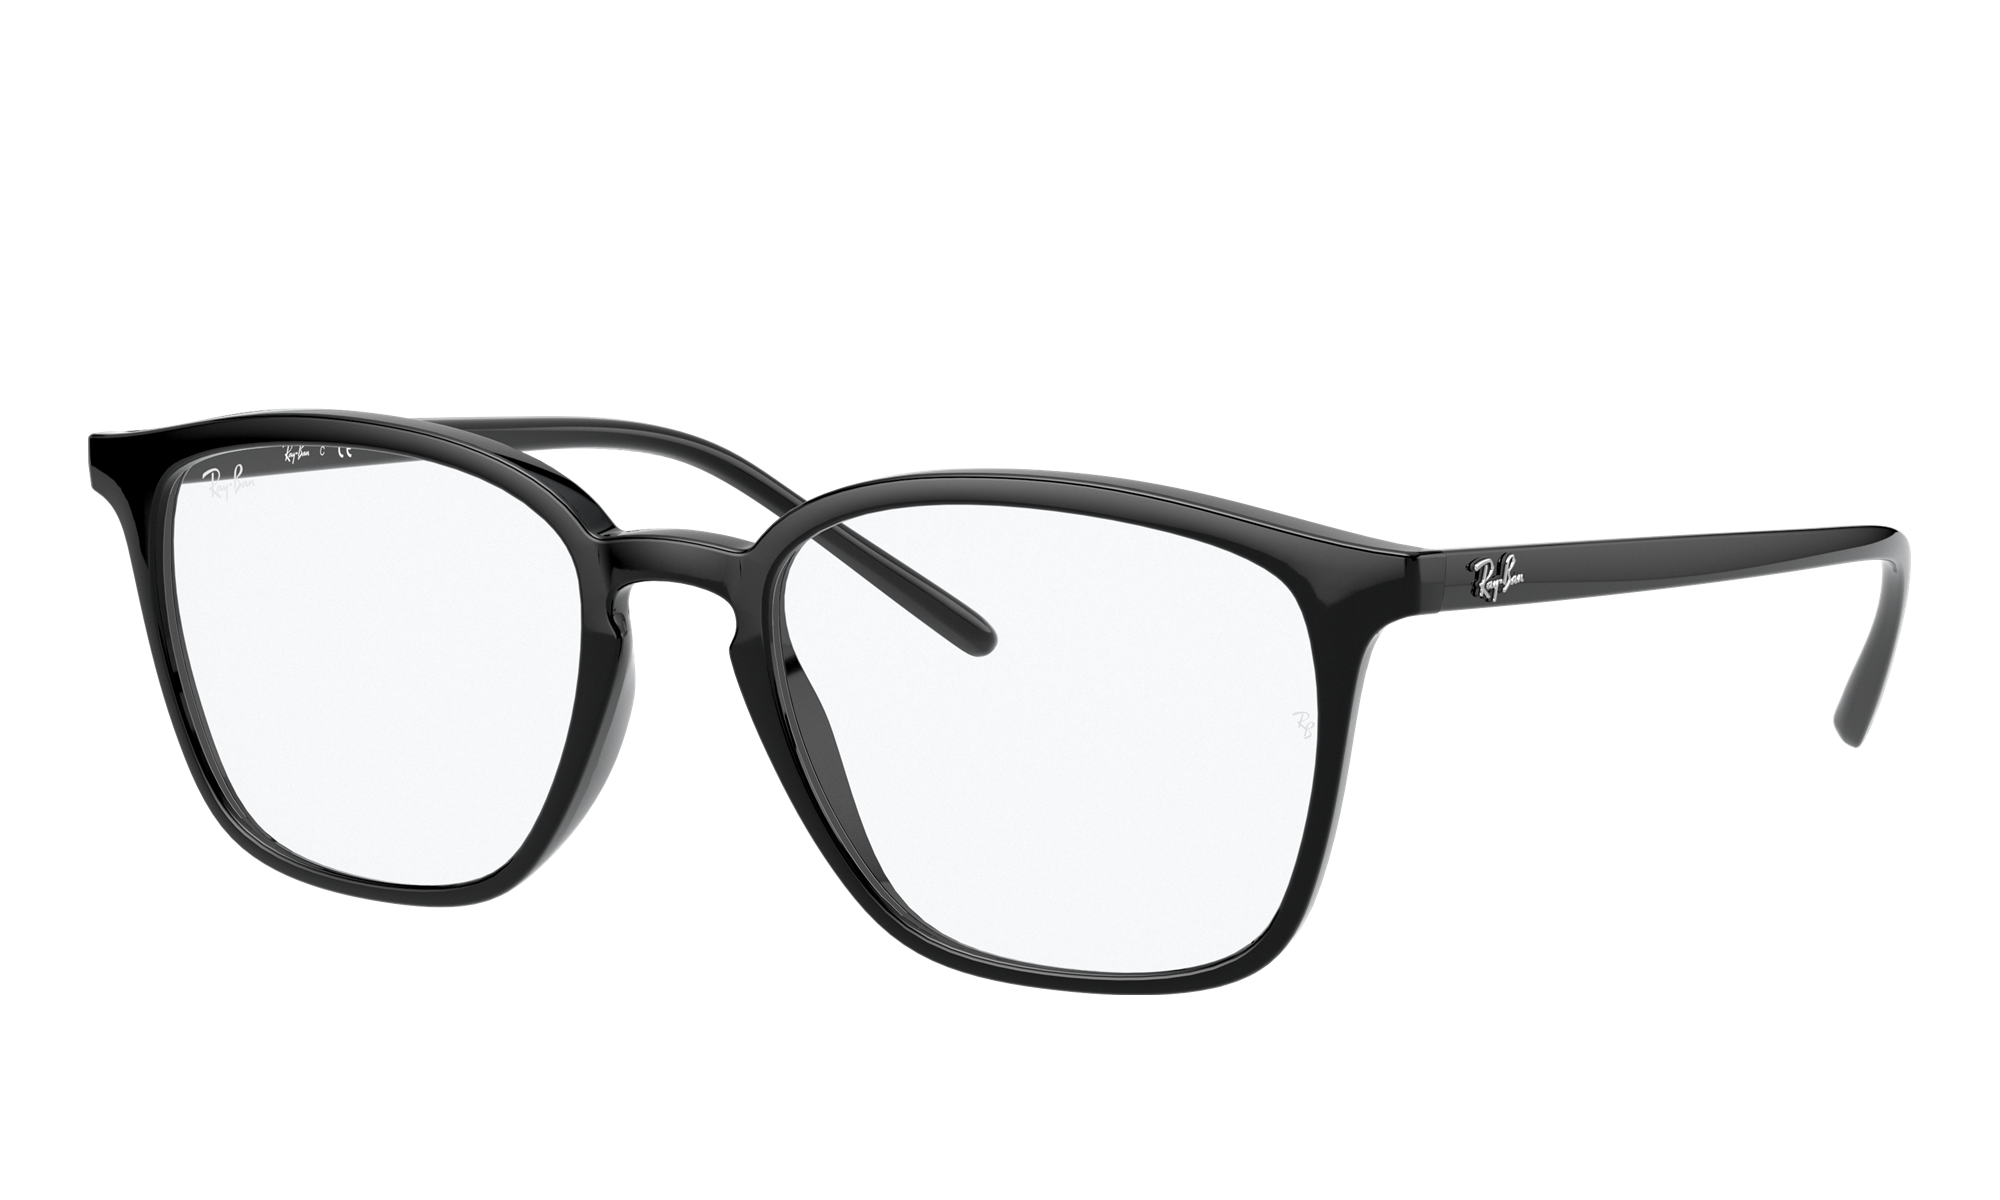 Ray-Ban Unisex Rx7185 Black Size: Extra Small